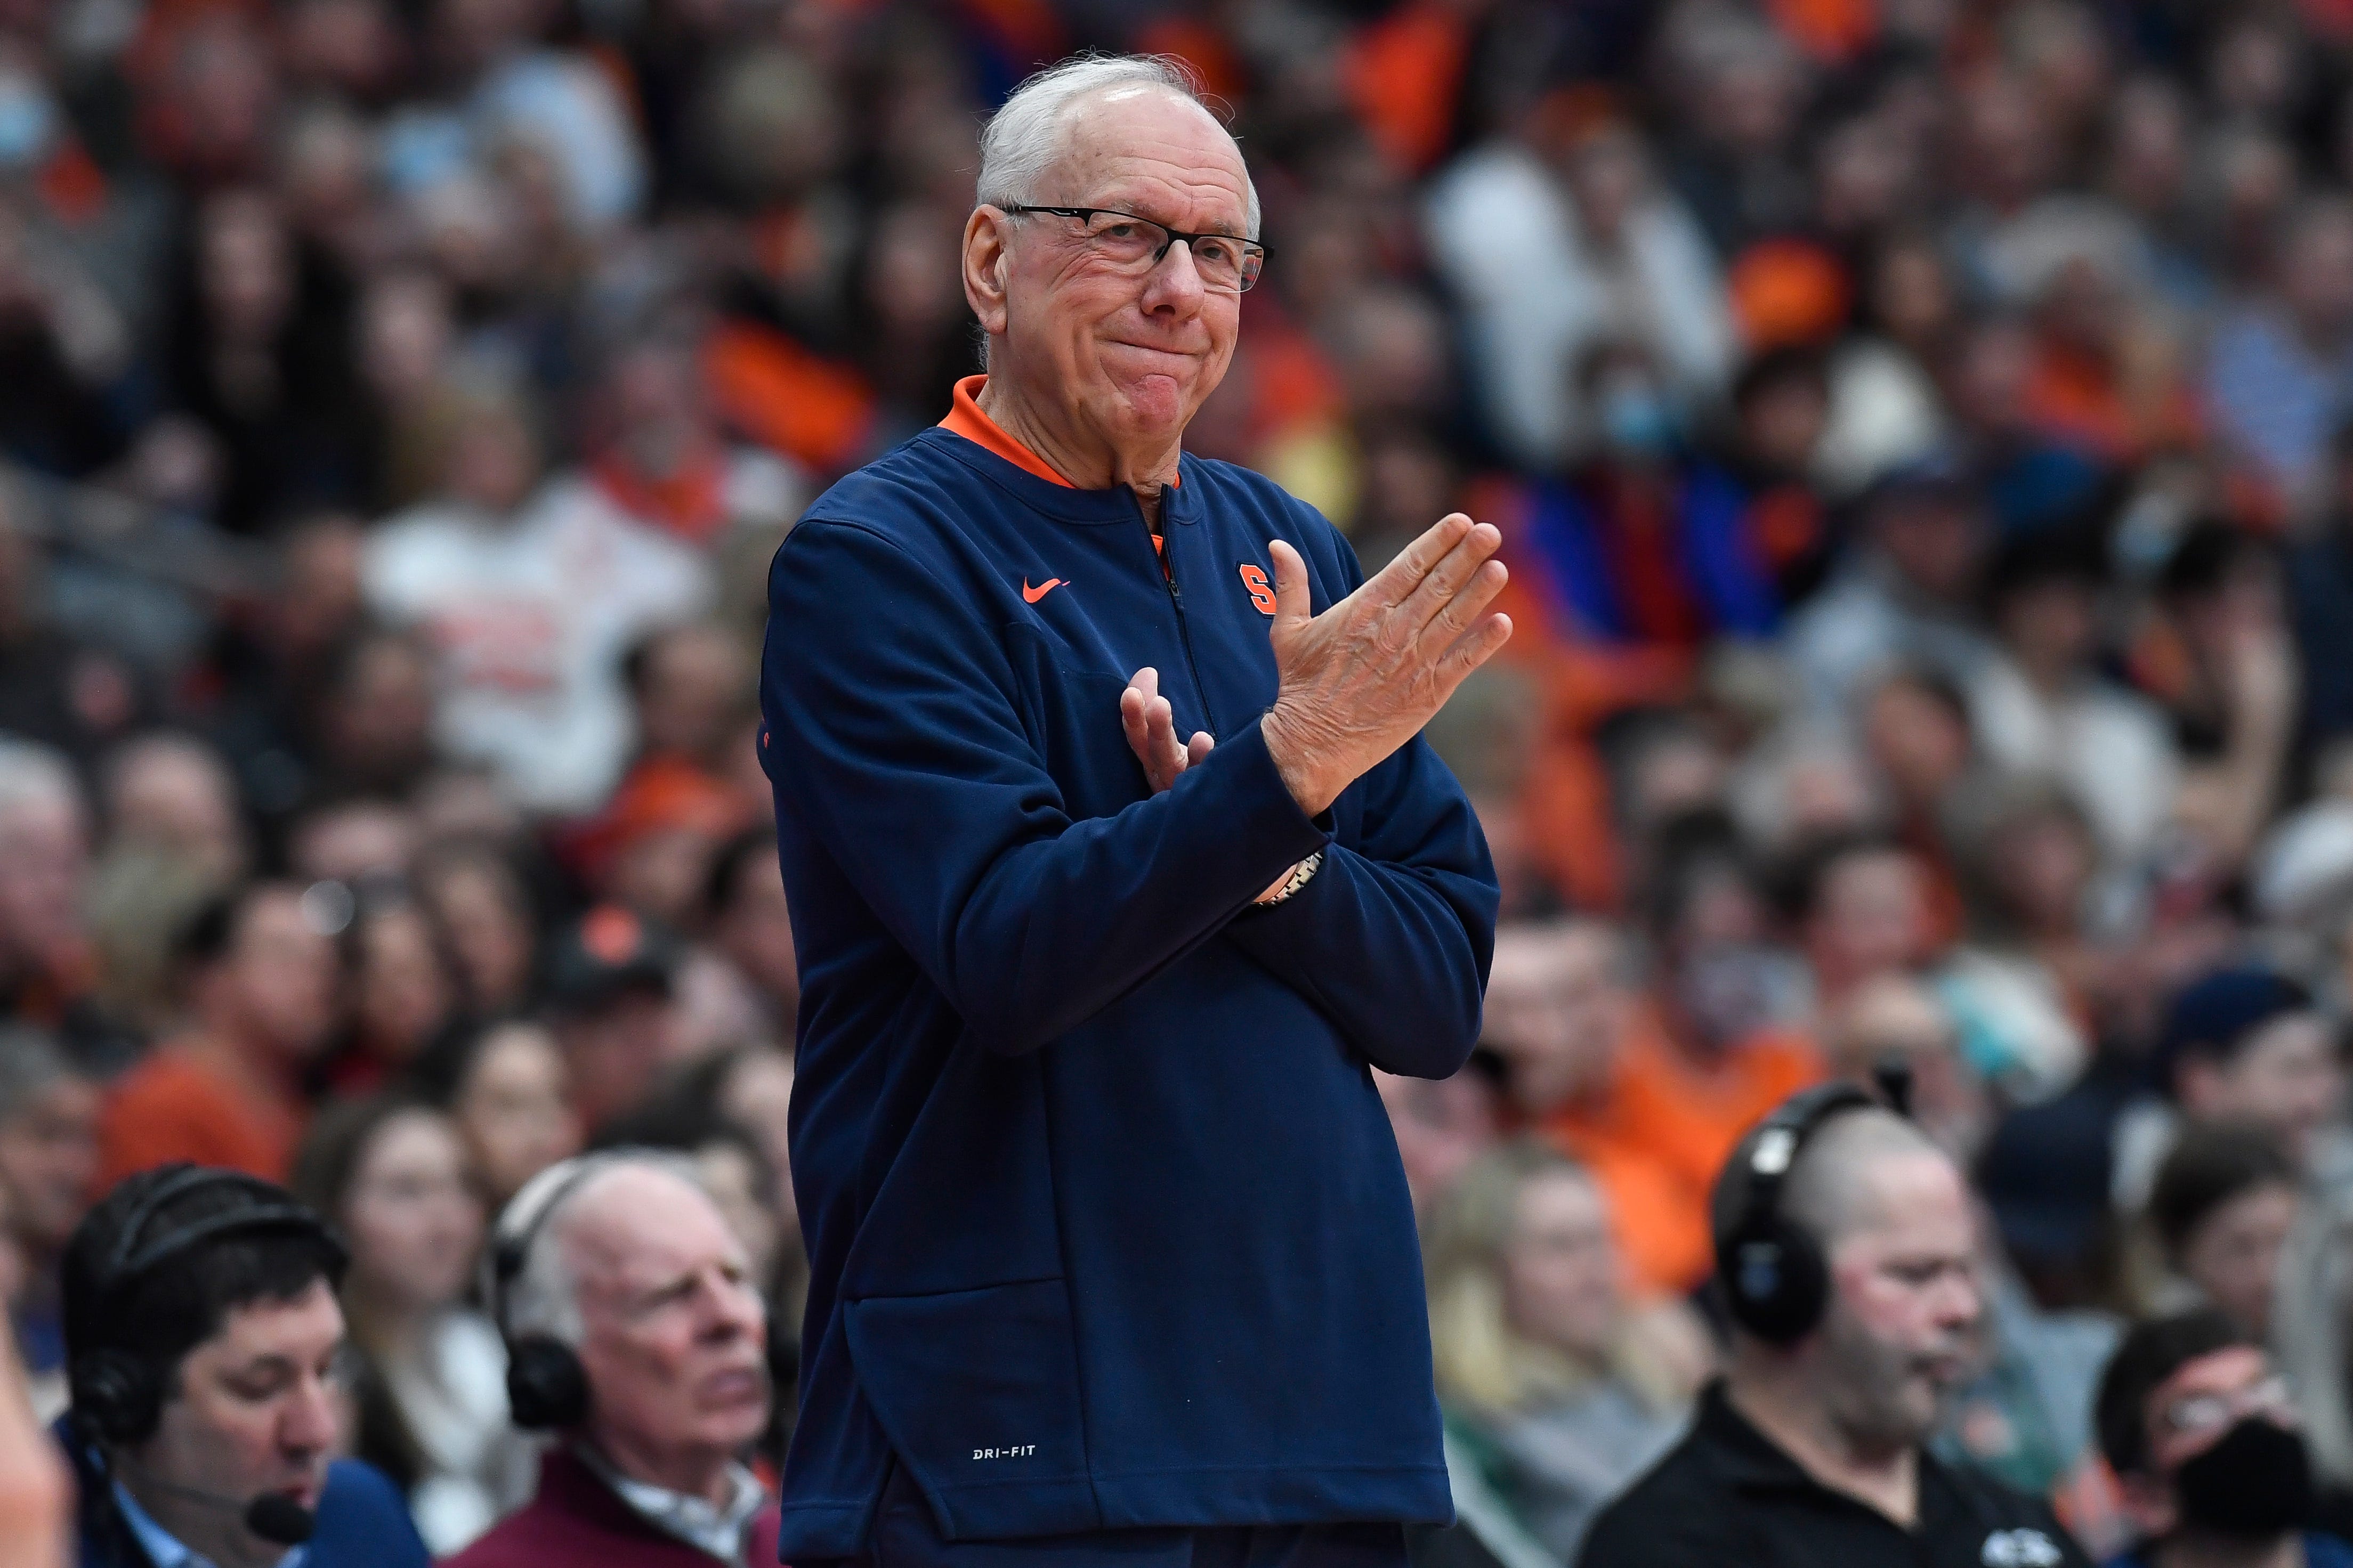 Jim Boeheim says he 'absolutely misspoke' by saying two ACC schools 'bought a team'